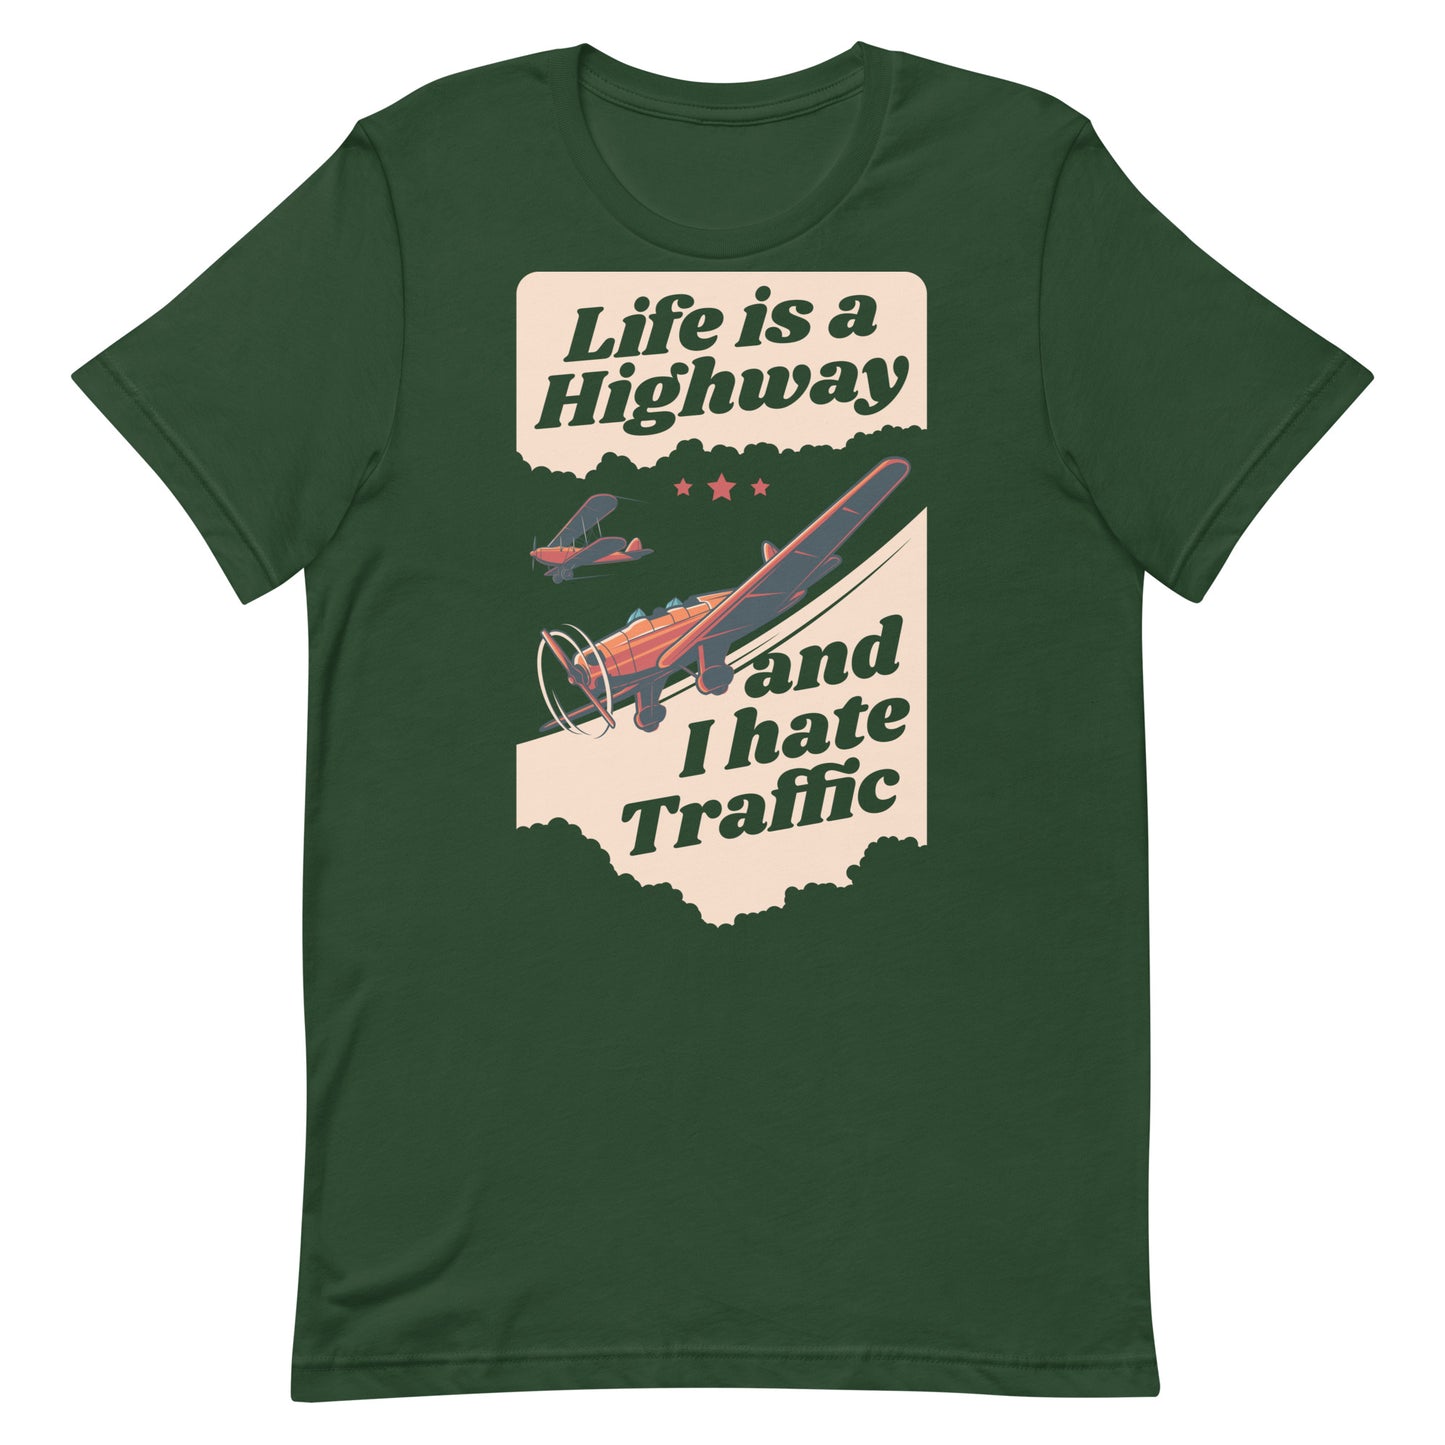 Life is a Highway and I Hate Traffic Unisex t-shirt